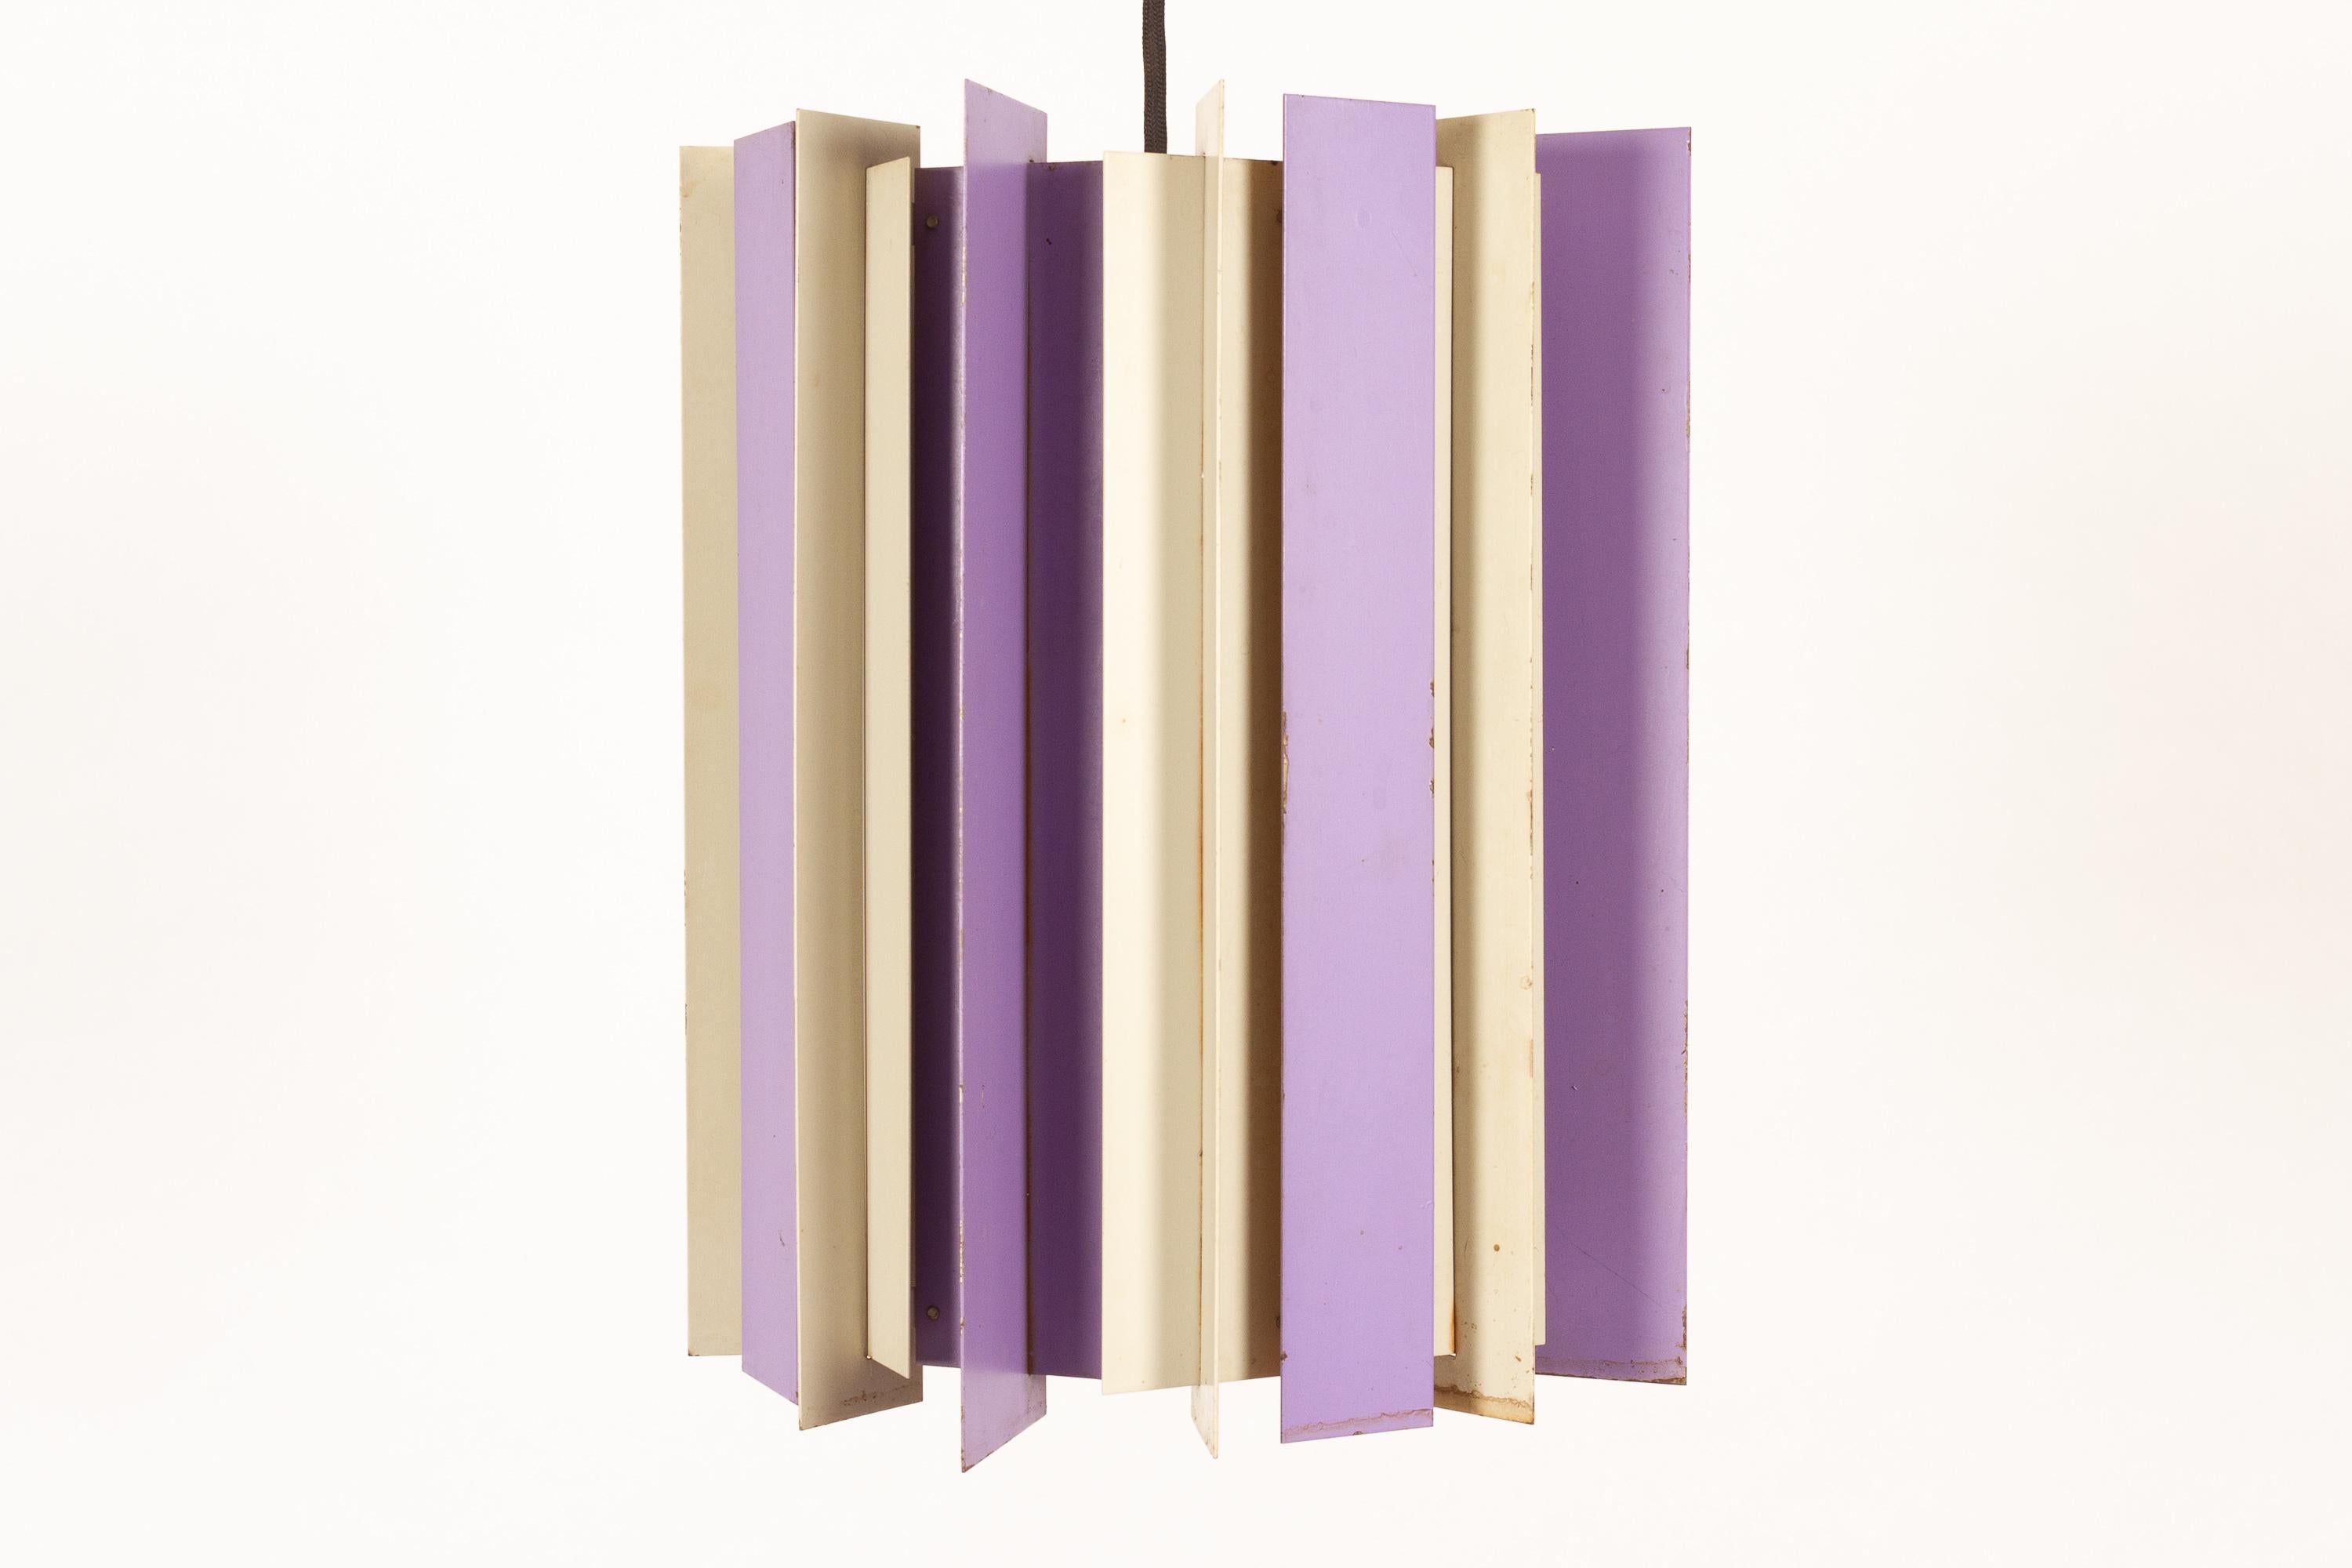 Danish retro ceiling pendant by Lyfa 1960s
Vintage ceiling lamp with vertical metal slats in purple, orange and white. 
Great patina, with some rust. E27 socket.